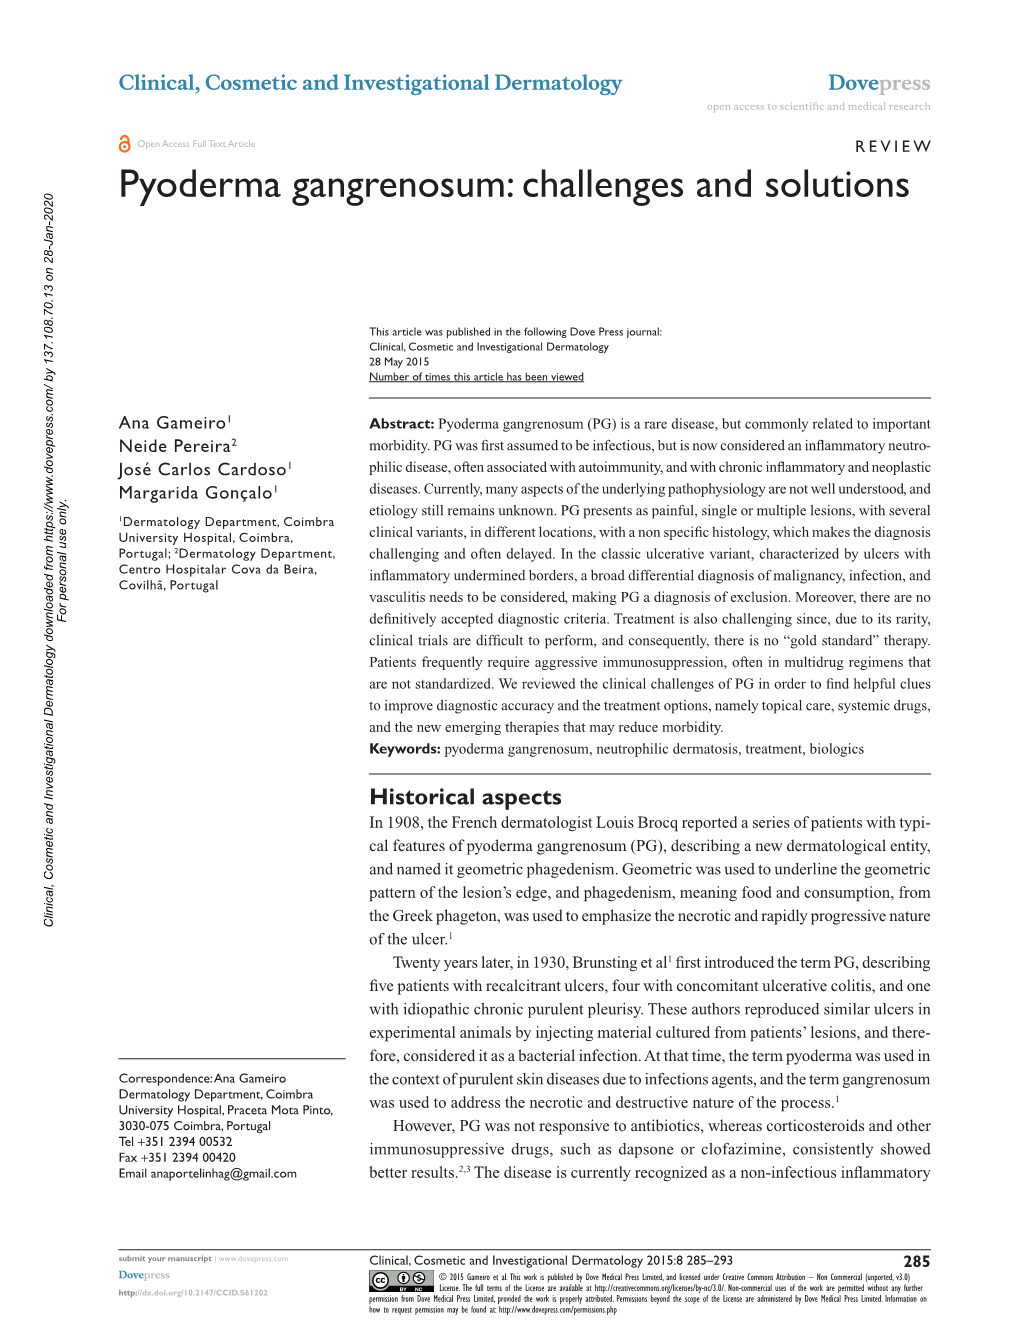 Pyoderma Gangrenosum: Challenges and Solutions